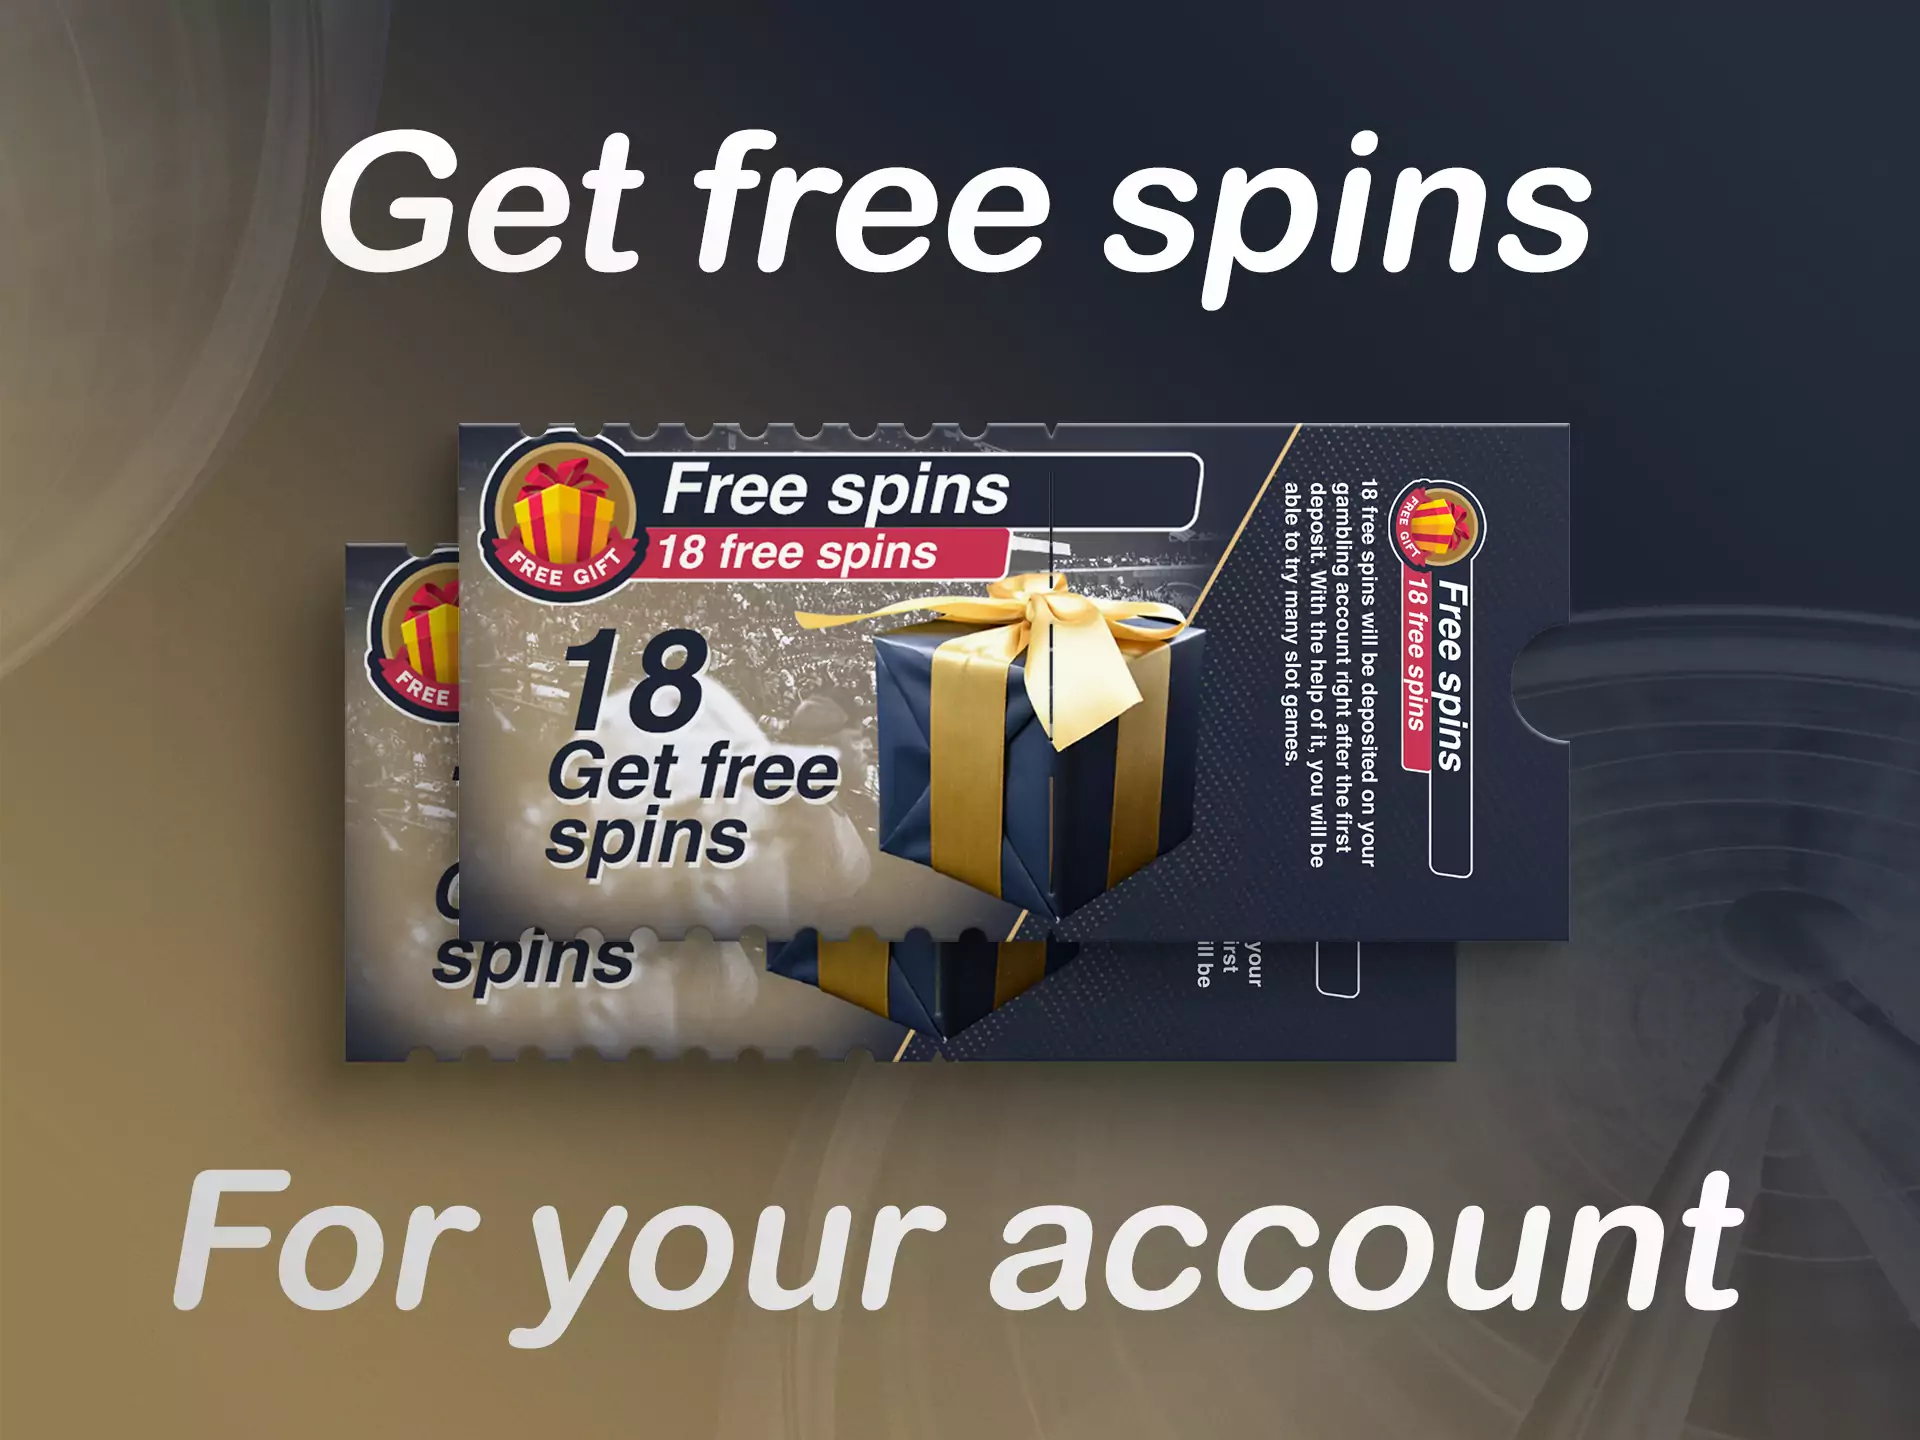 Fans of a casino can get free spins from M88.